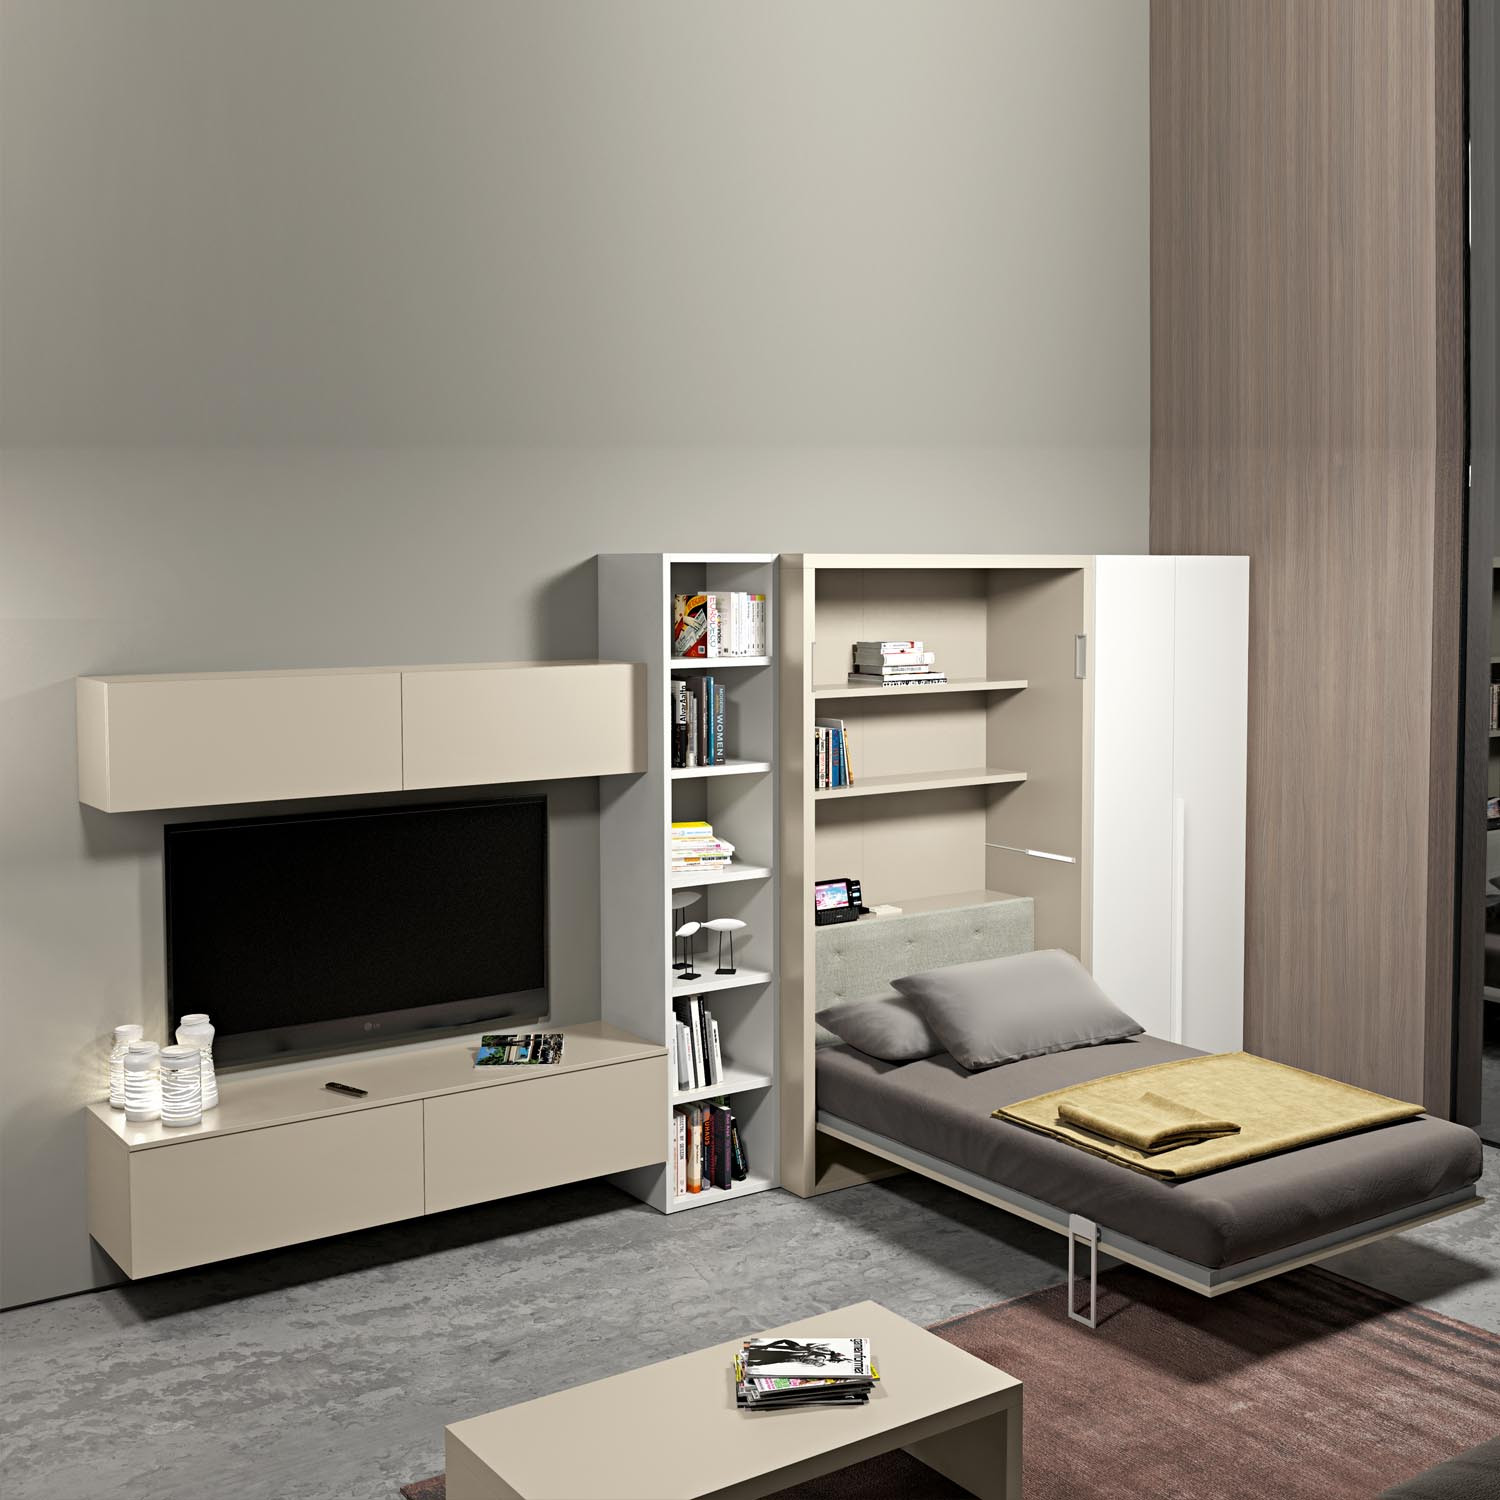 Small Space Bedroom Furniture
 Modular Furniture for Small Spaces – HomesFeed